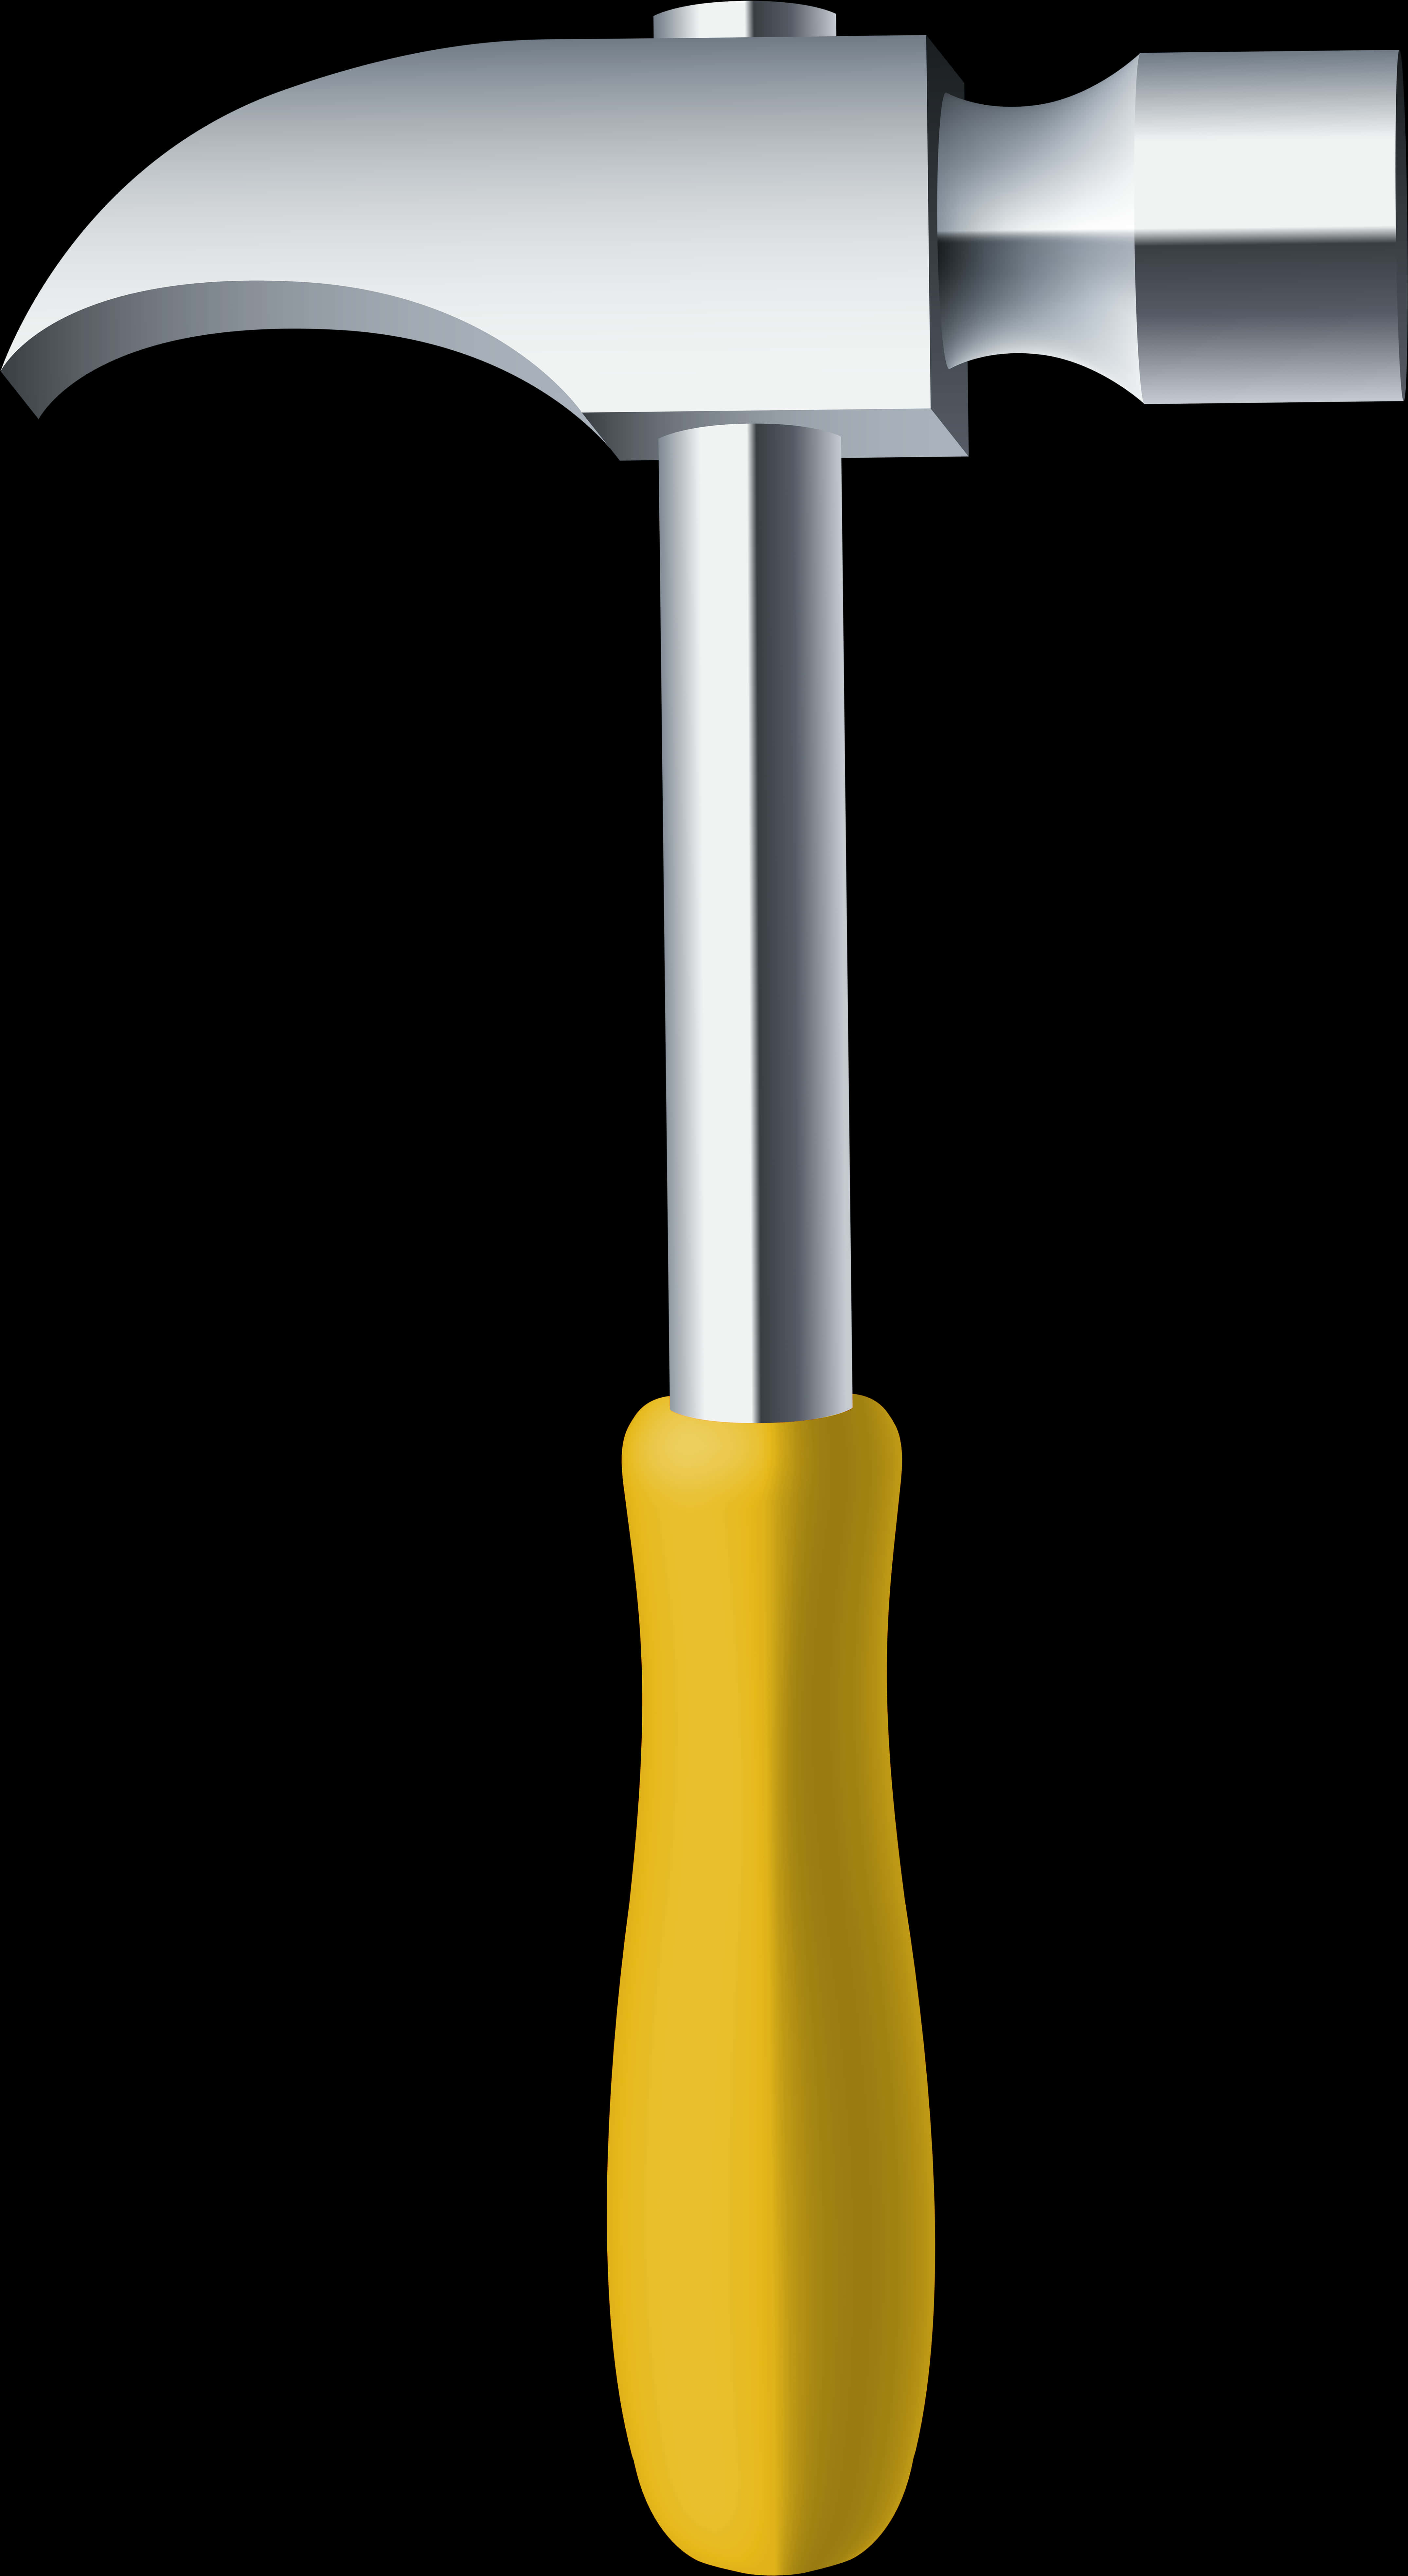 A Yellow Screwdriver With A Black Background